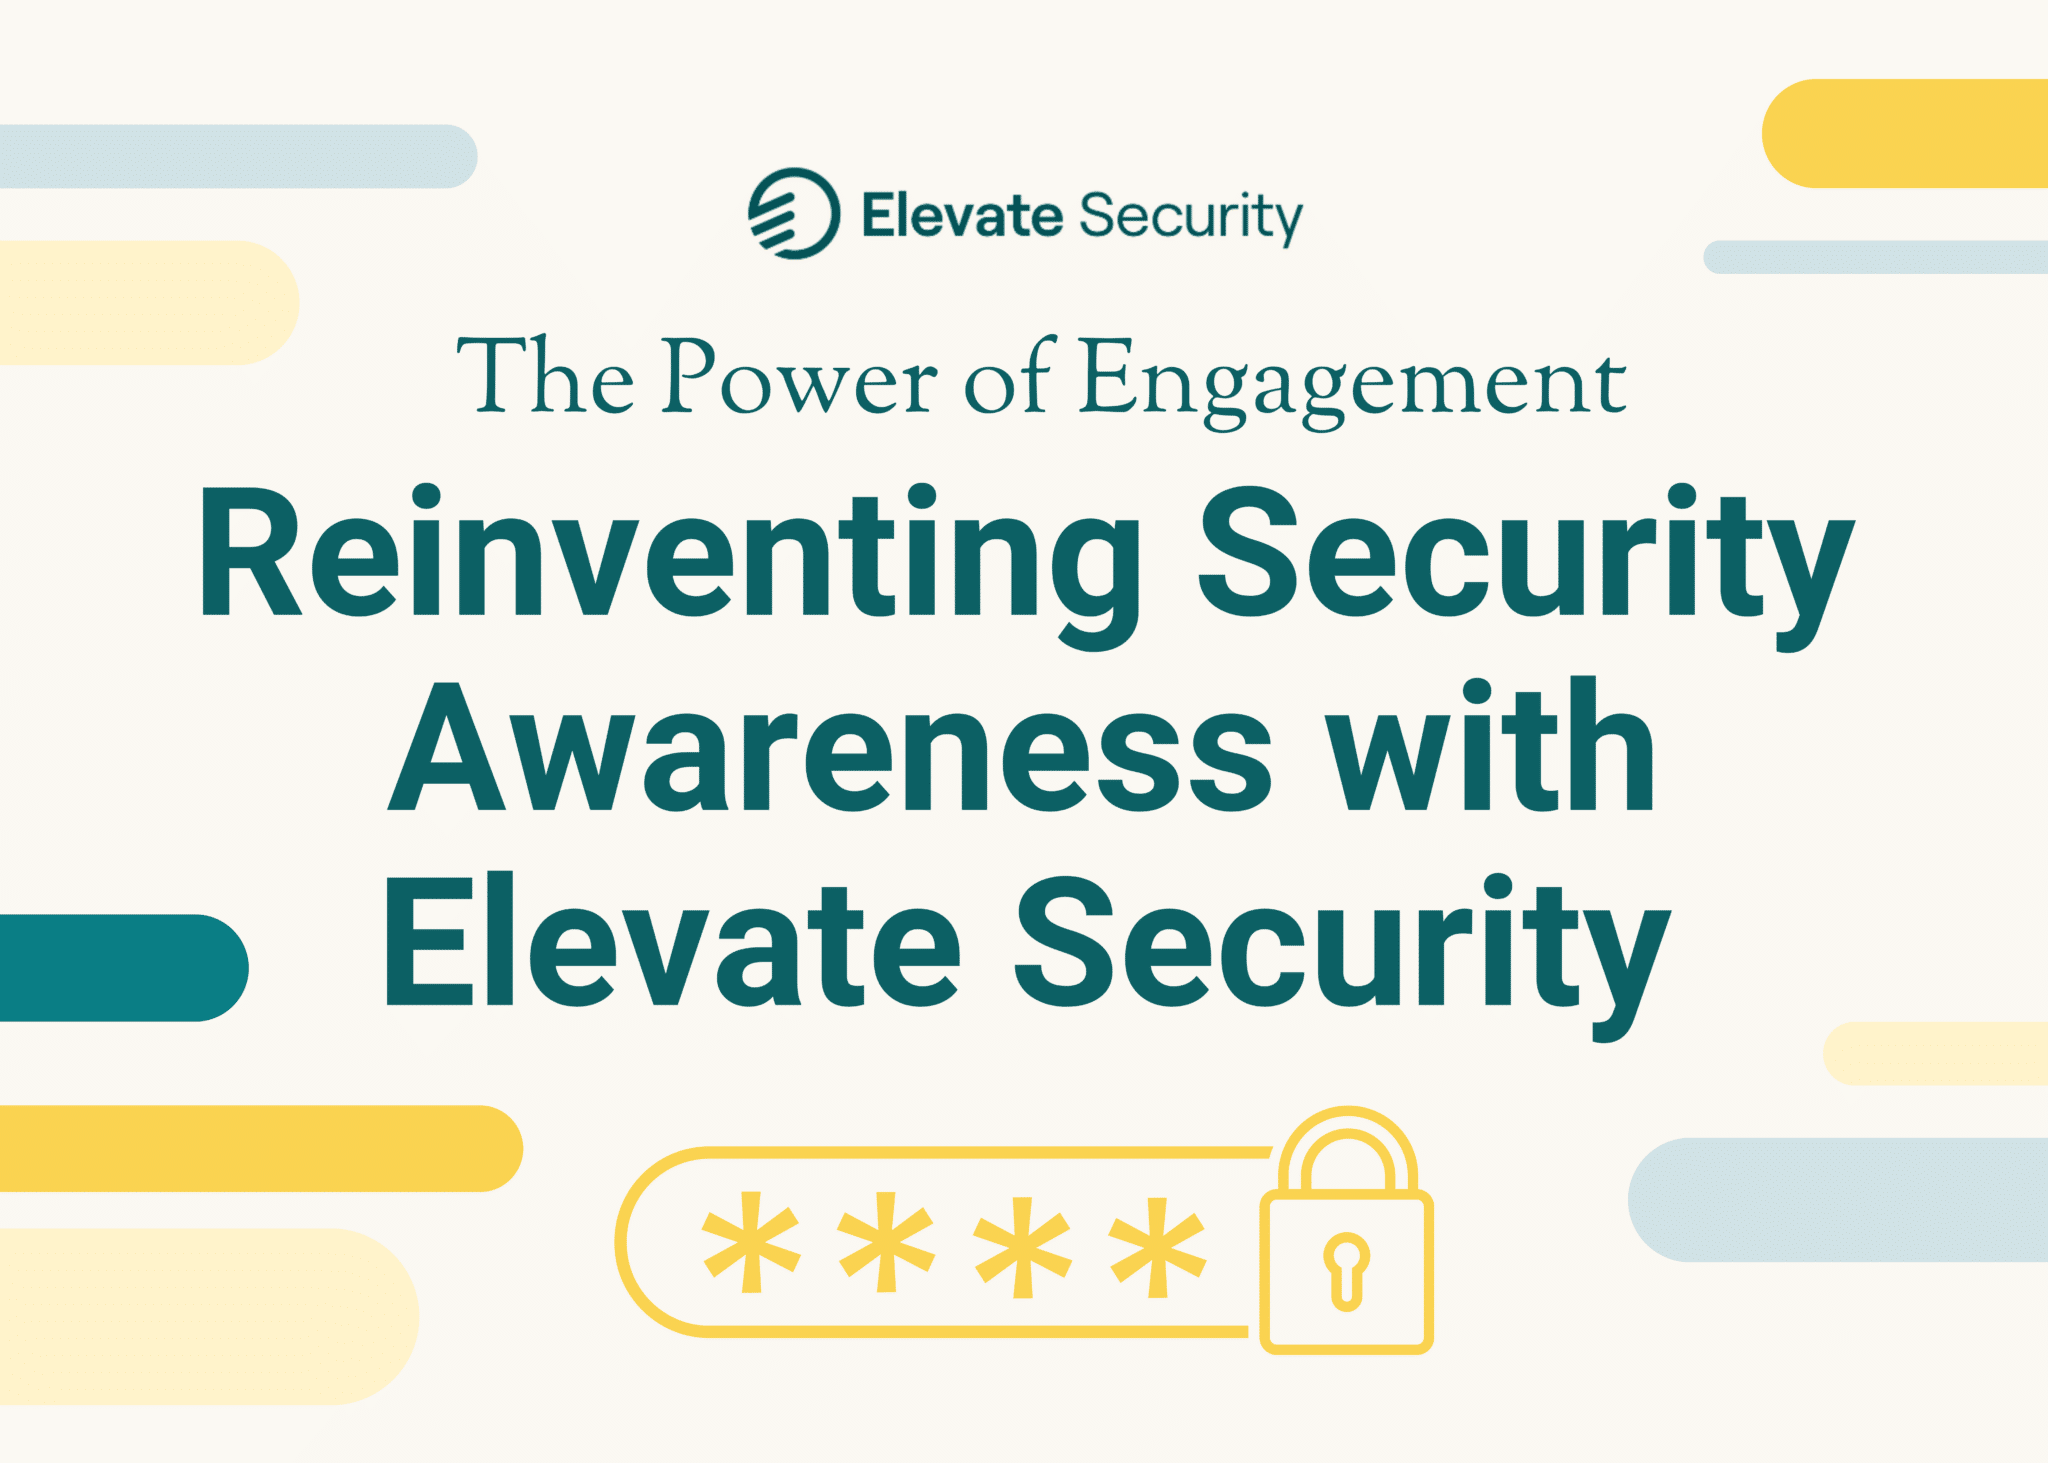 Reinventing Security Awareness with Elevate Security